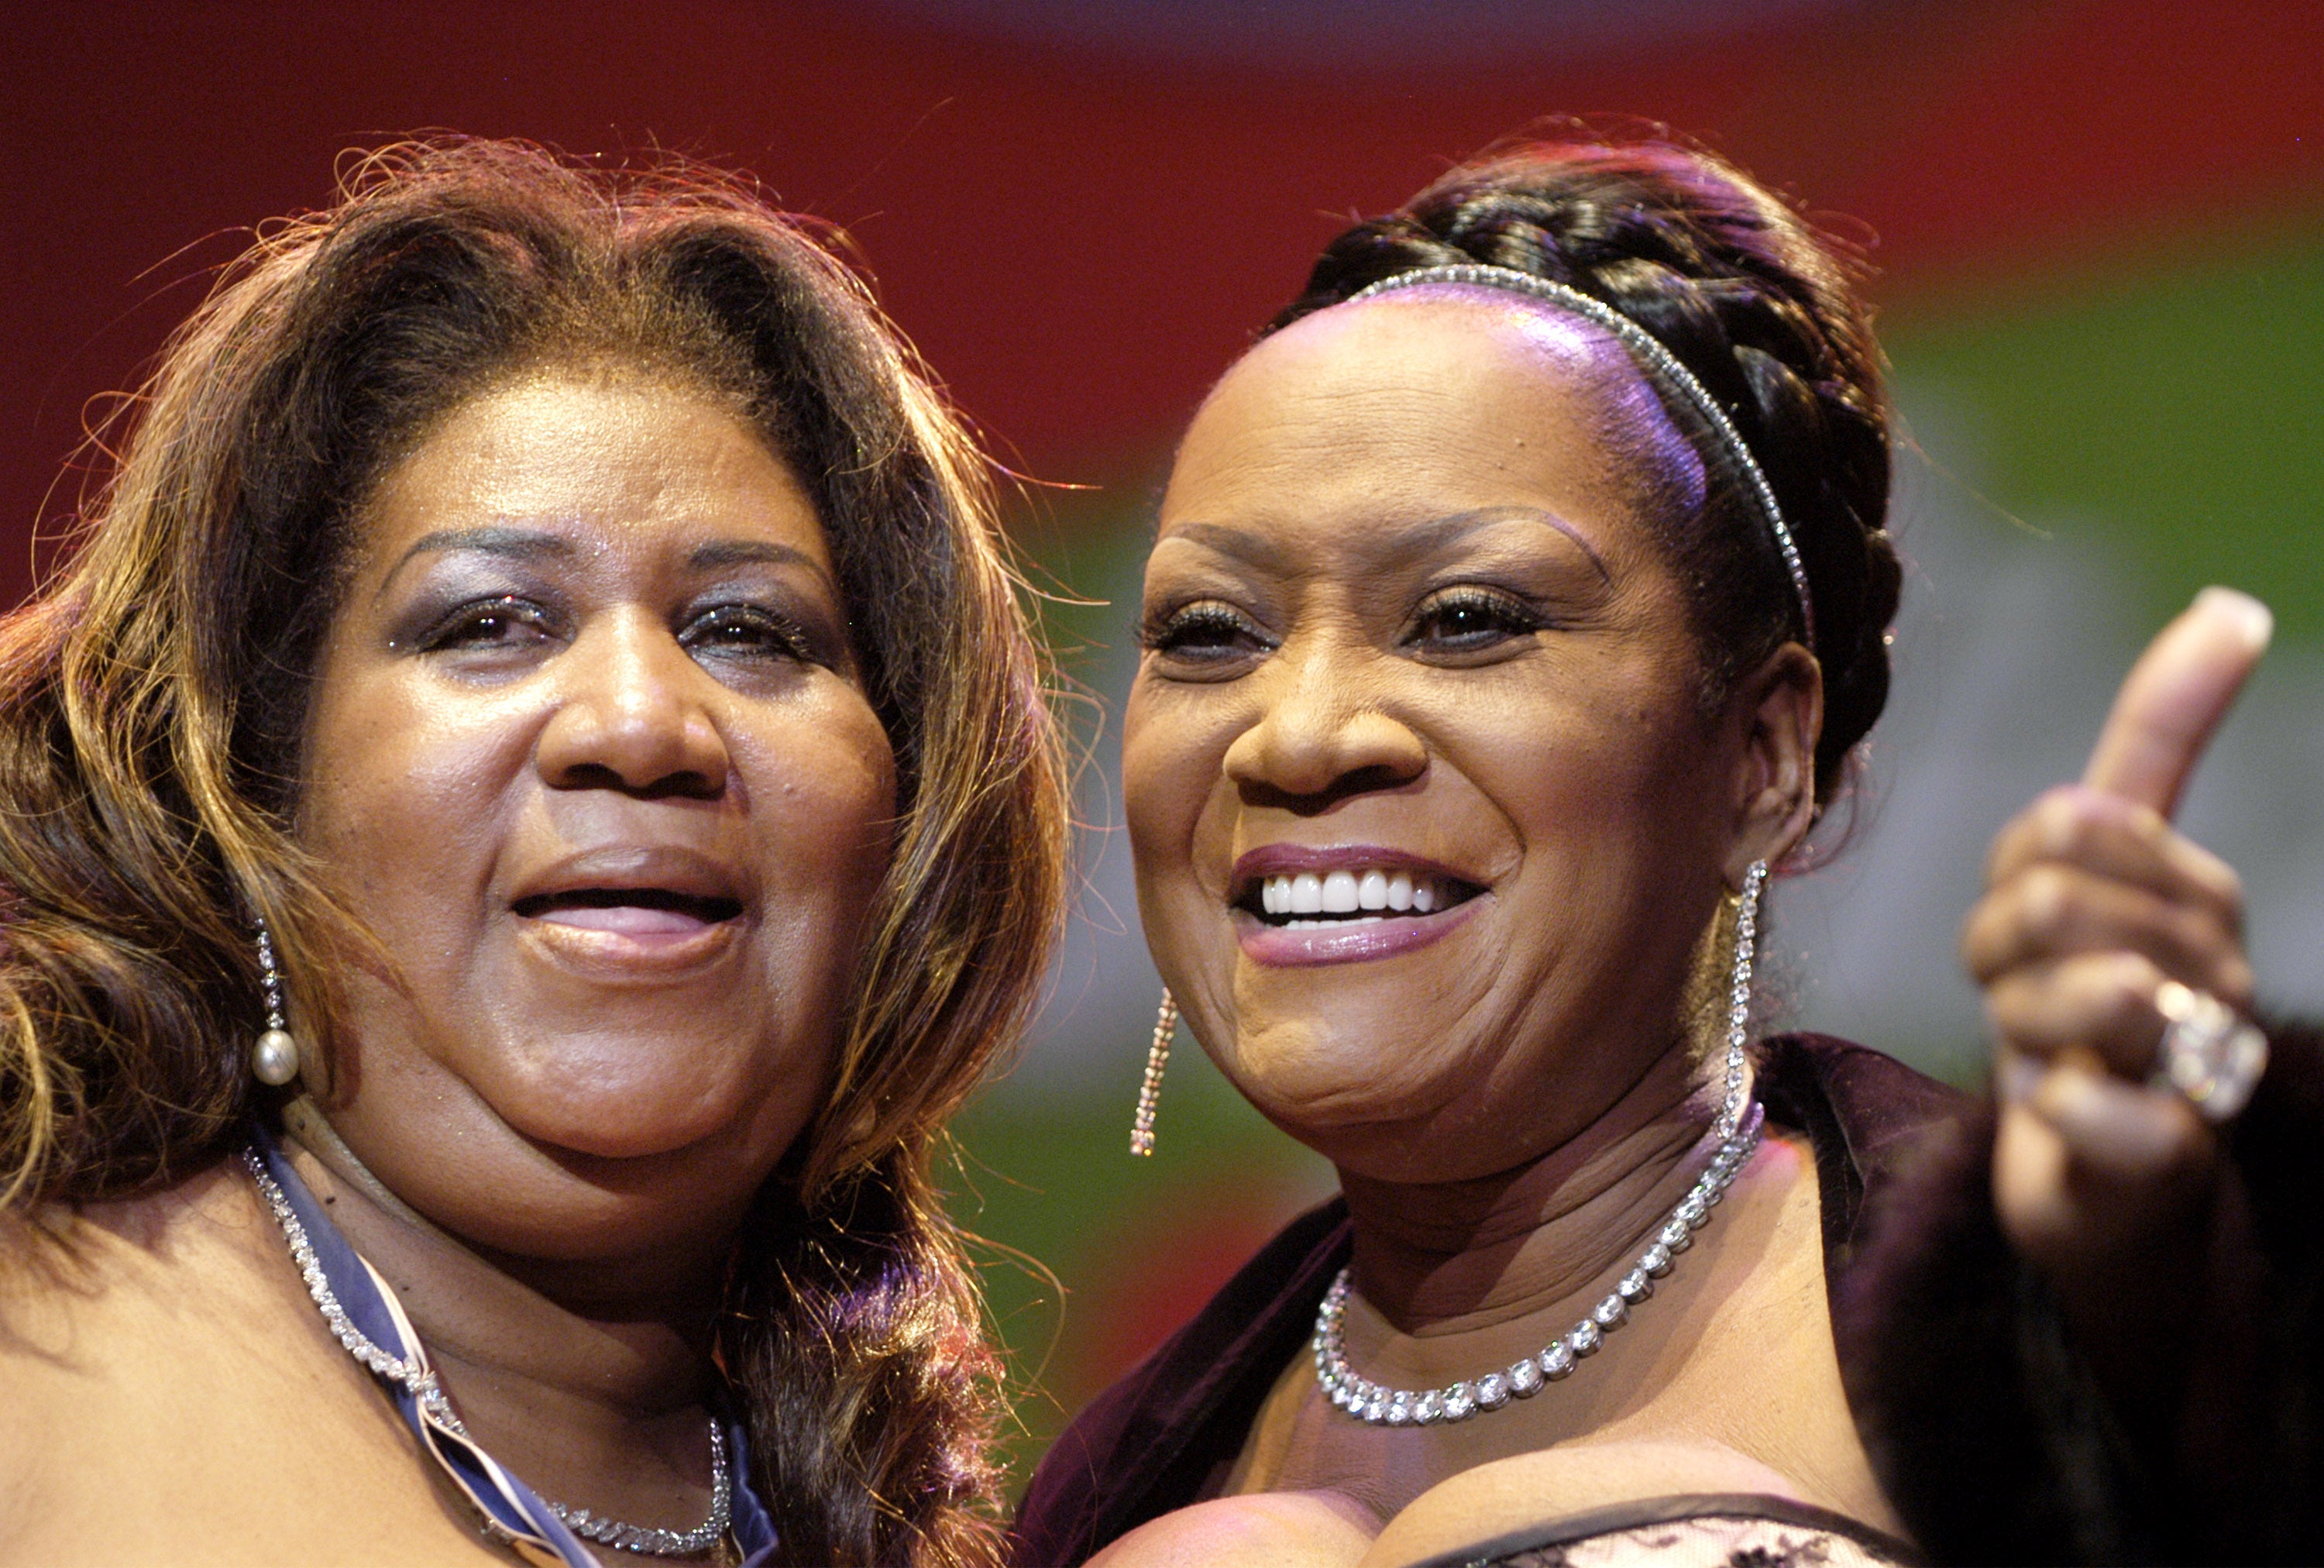 Patti LaBelle Reacts To The Death Of Her 'Sister In Song' Aretha Franklin